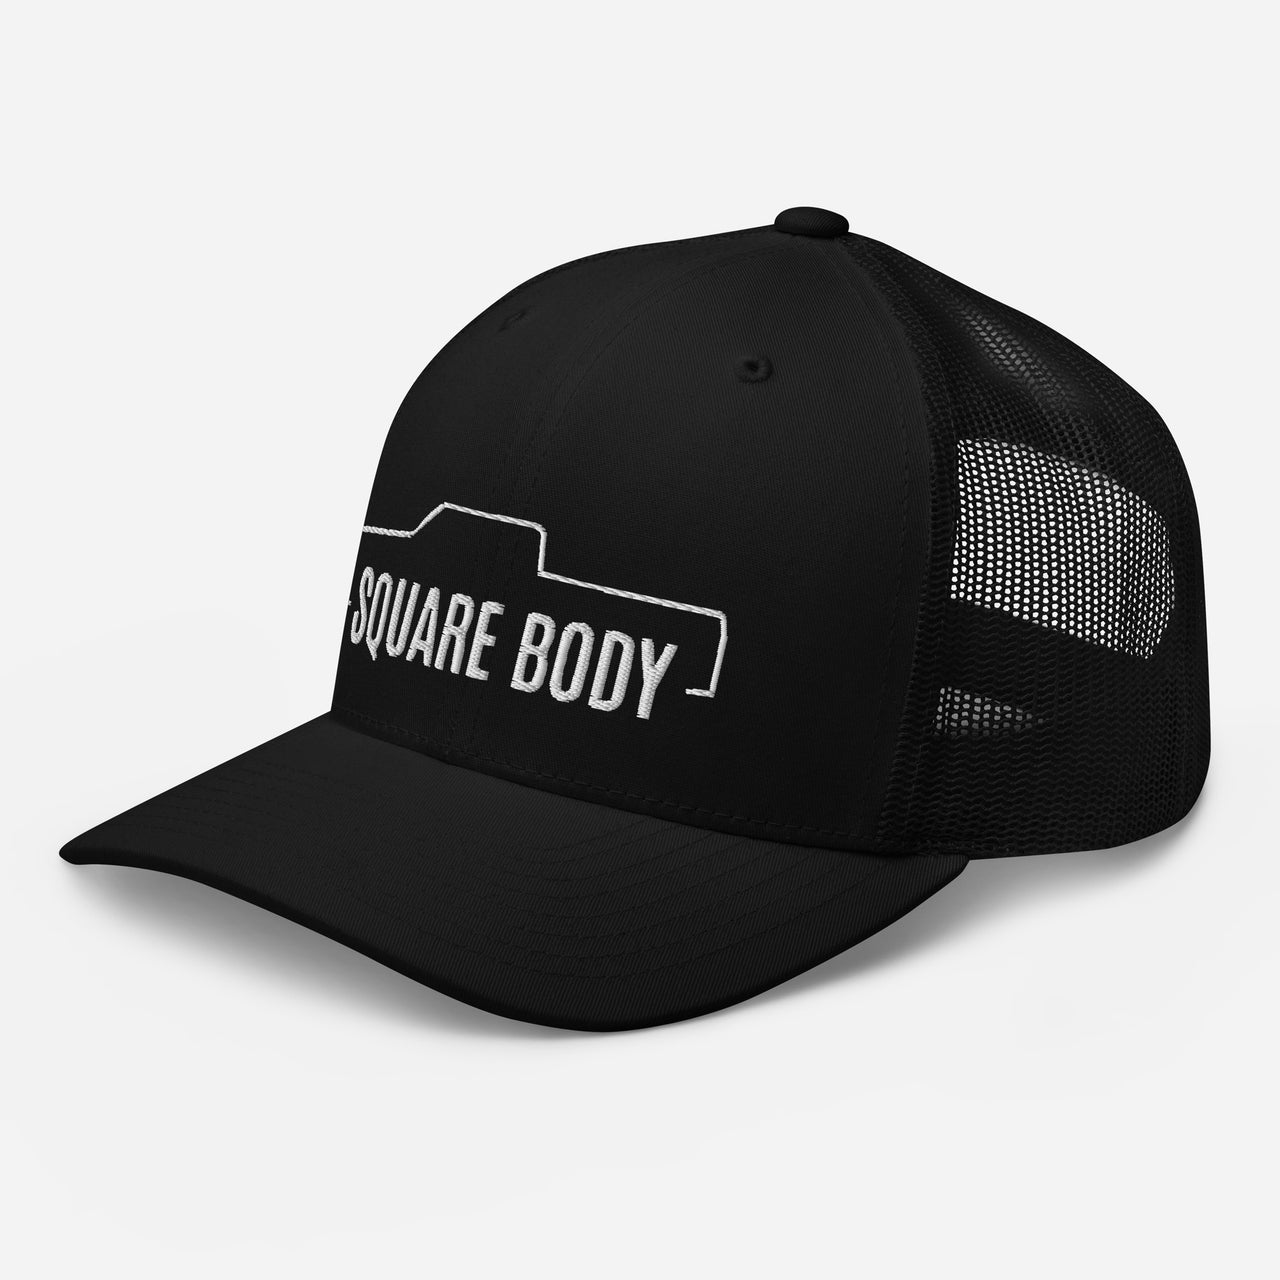 3/4 view of Crew Cab Square Body Trucker Hat From Aggressive Thread in Black